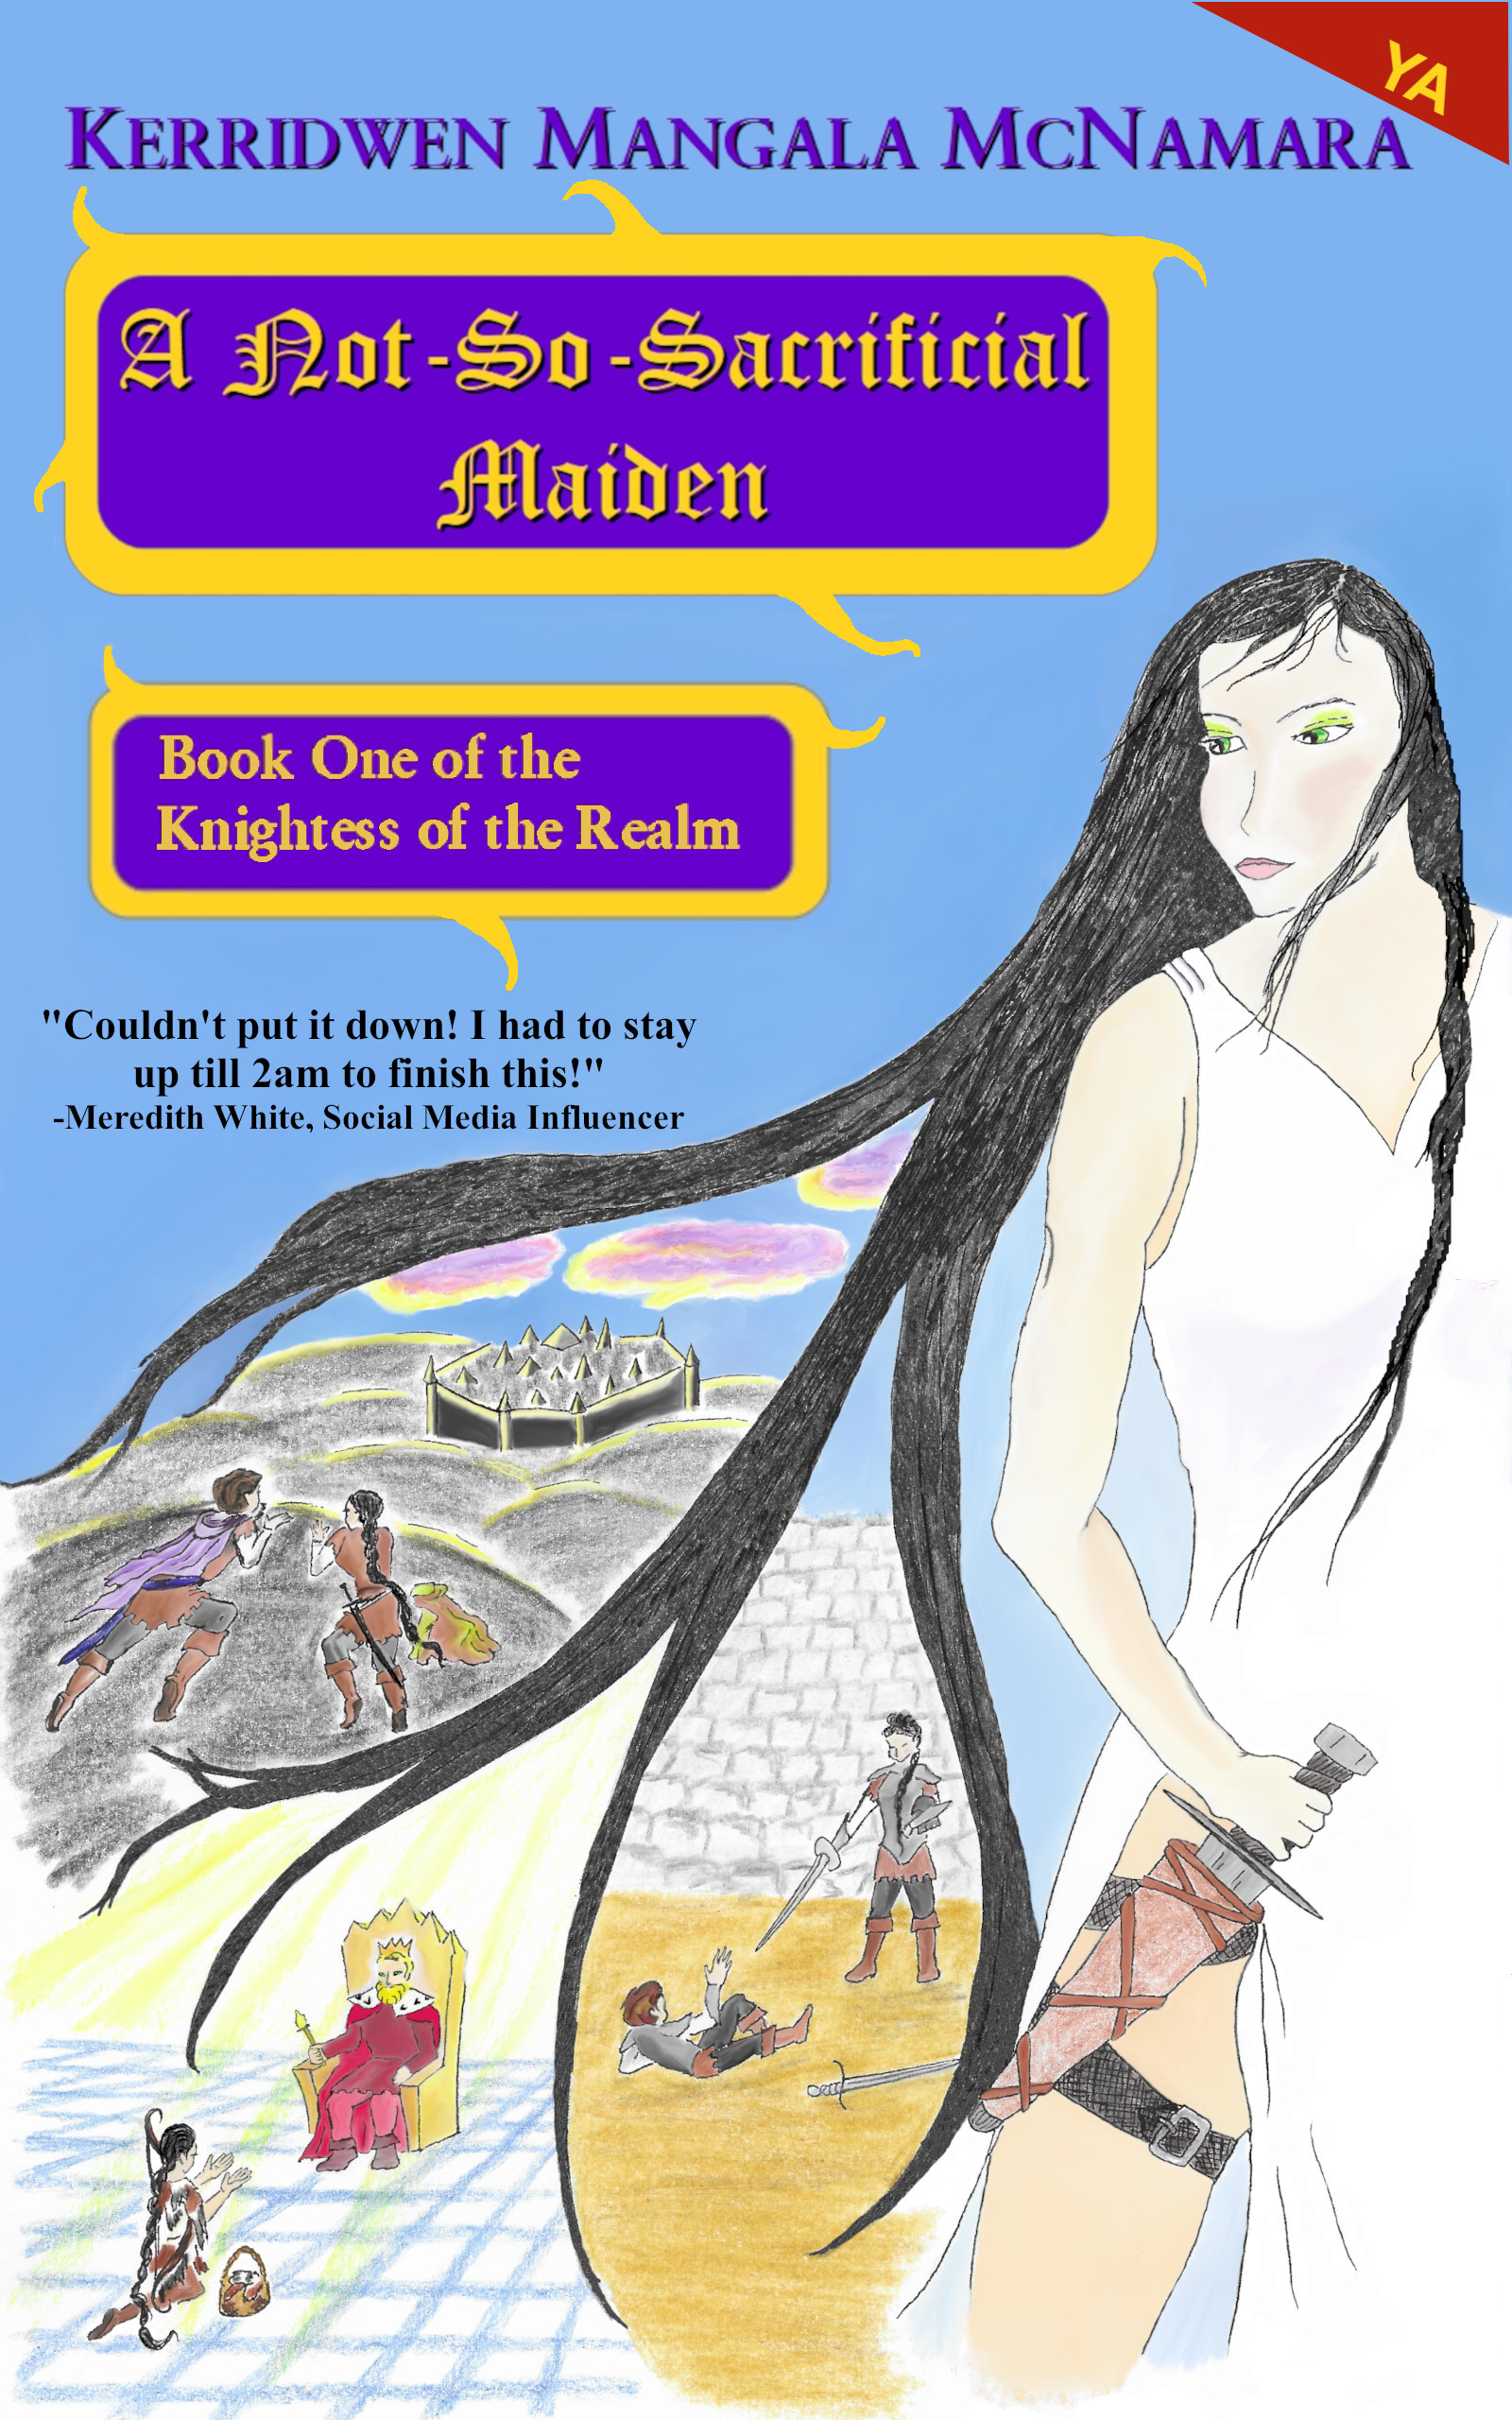 Cover for book: A Not-So-Sacrificial Maiden, Book One of the Knightess of the Realm